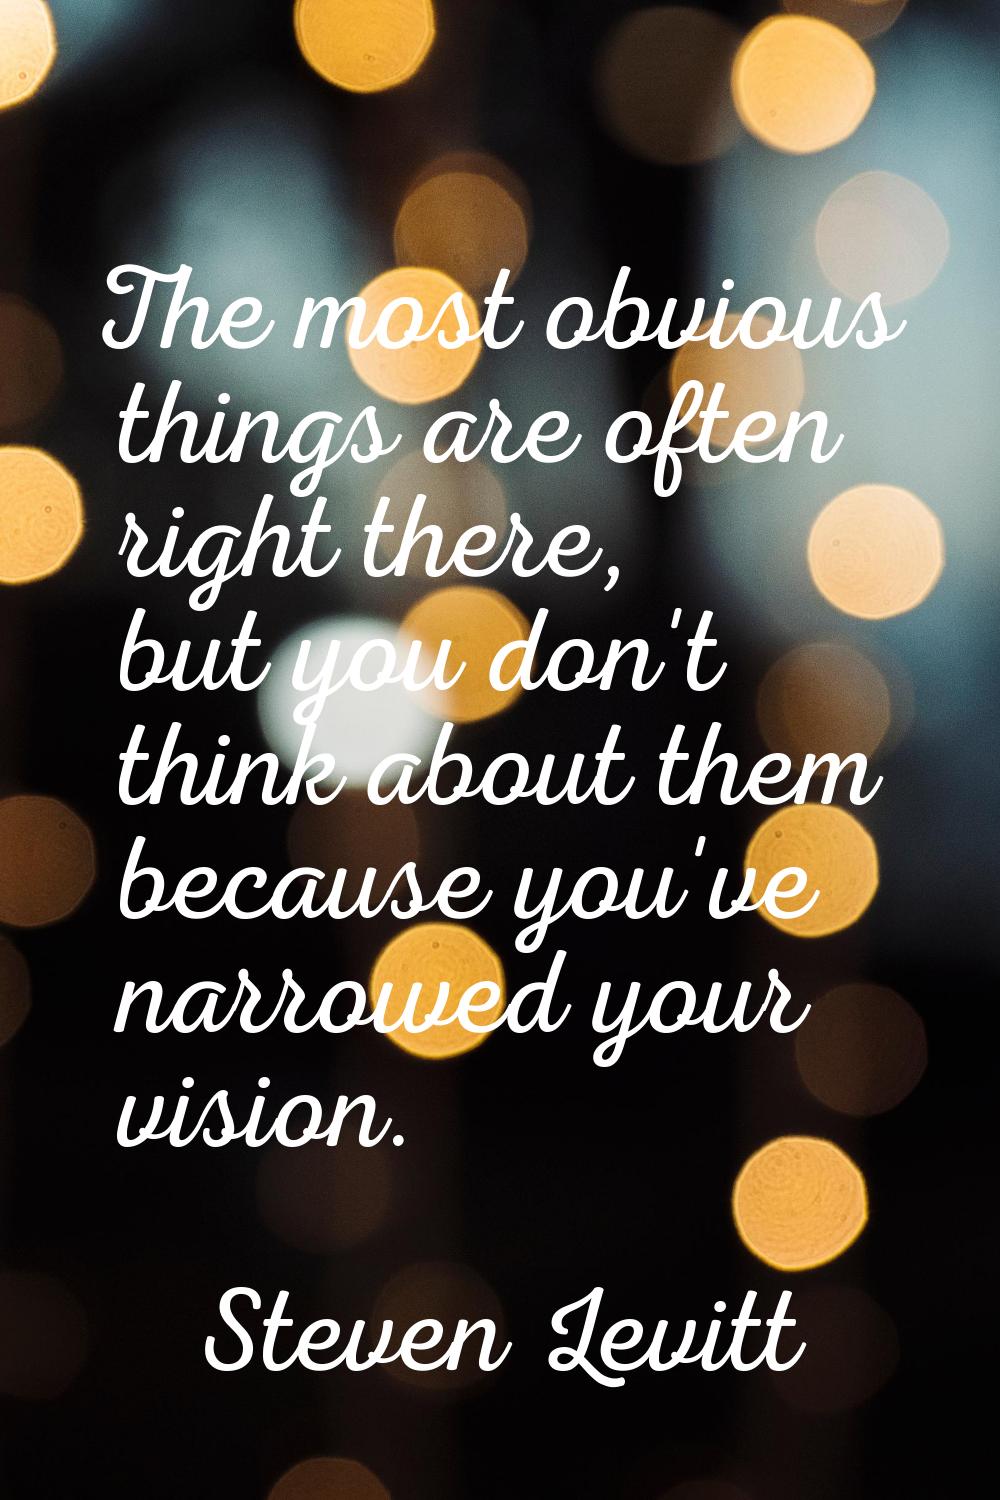 The most obvious things are often right there, but you don't think about them because you've narrow